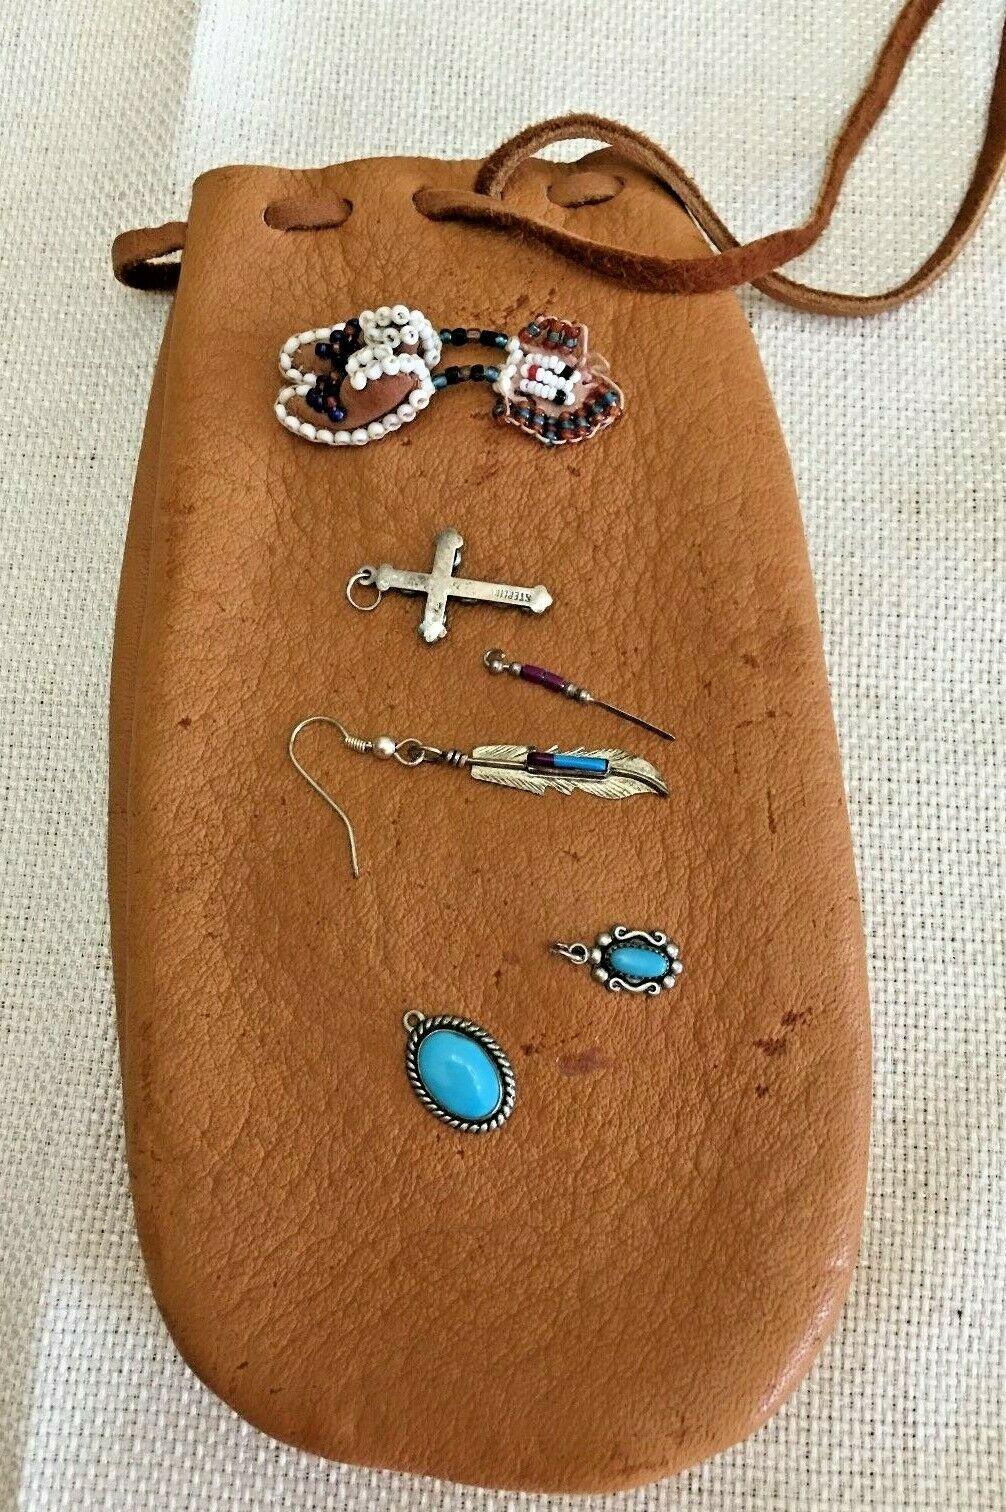 Elk Skin Medicine Pouch With Trinkets Inside  Locally Hand Made And Sewn  Kk